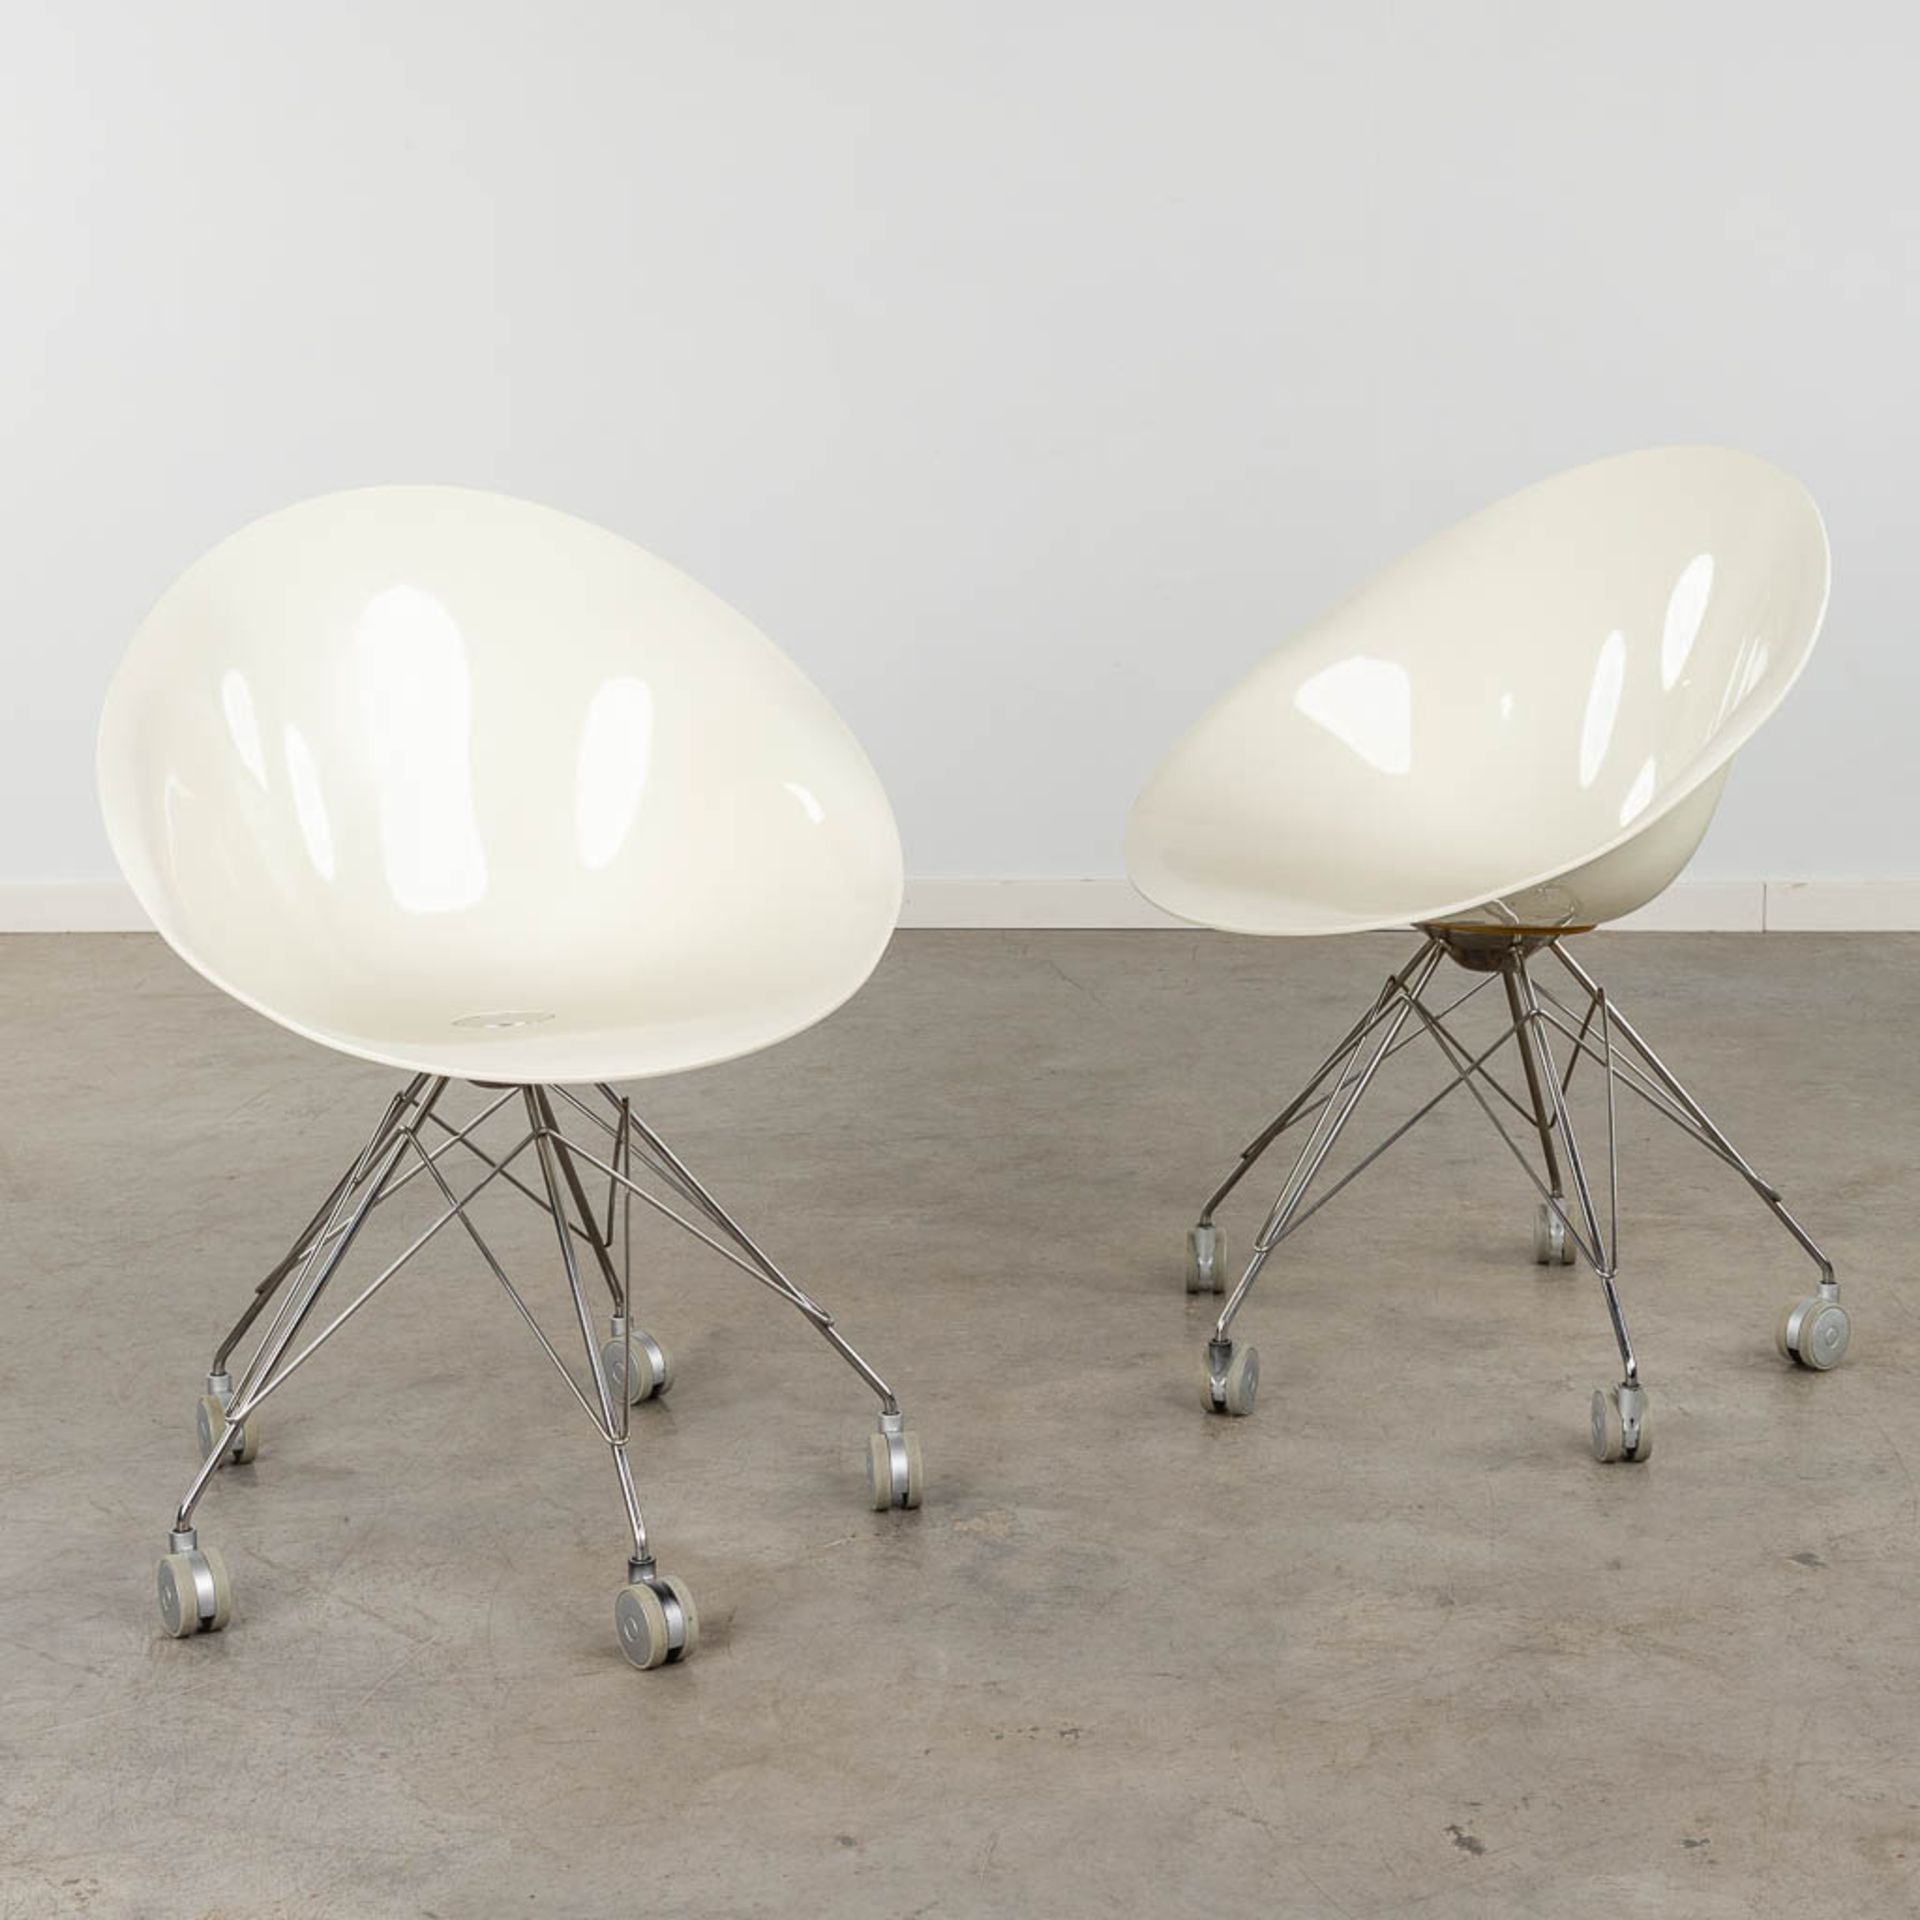 Philippe STARCK (1949) 'Ero' for Kartell, two office chairs. (D:59 x W:62 x H:82 cm)